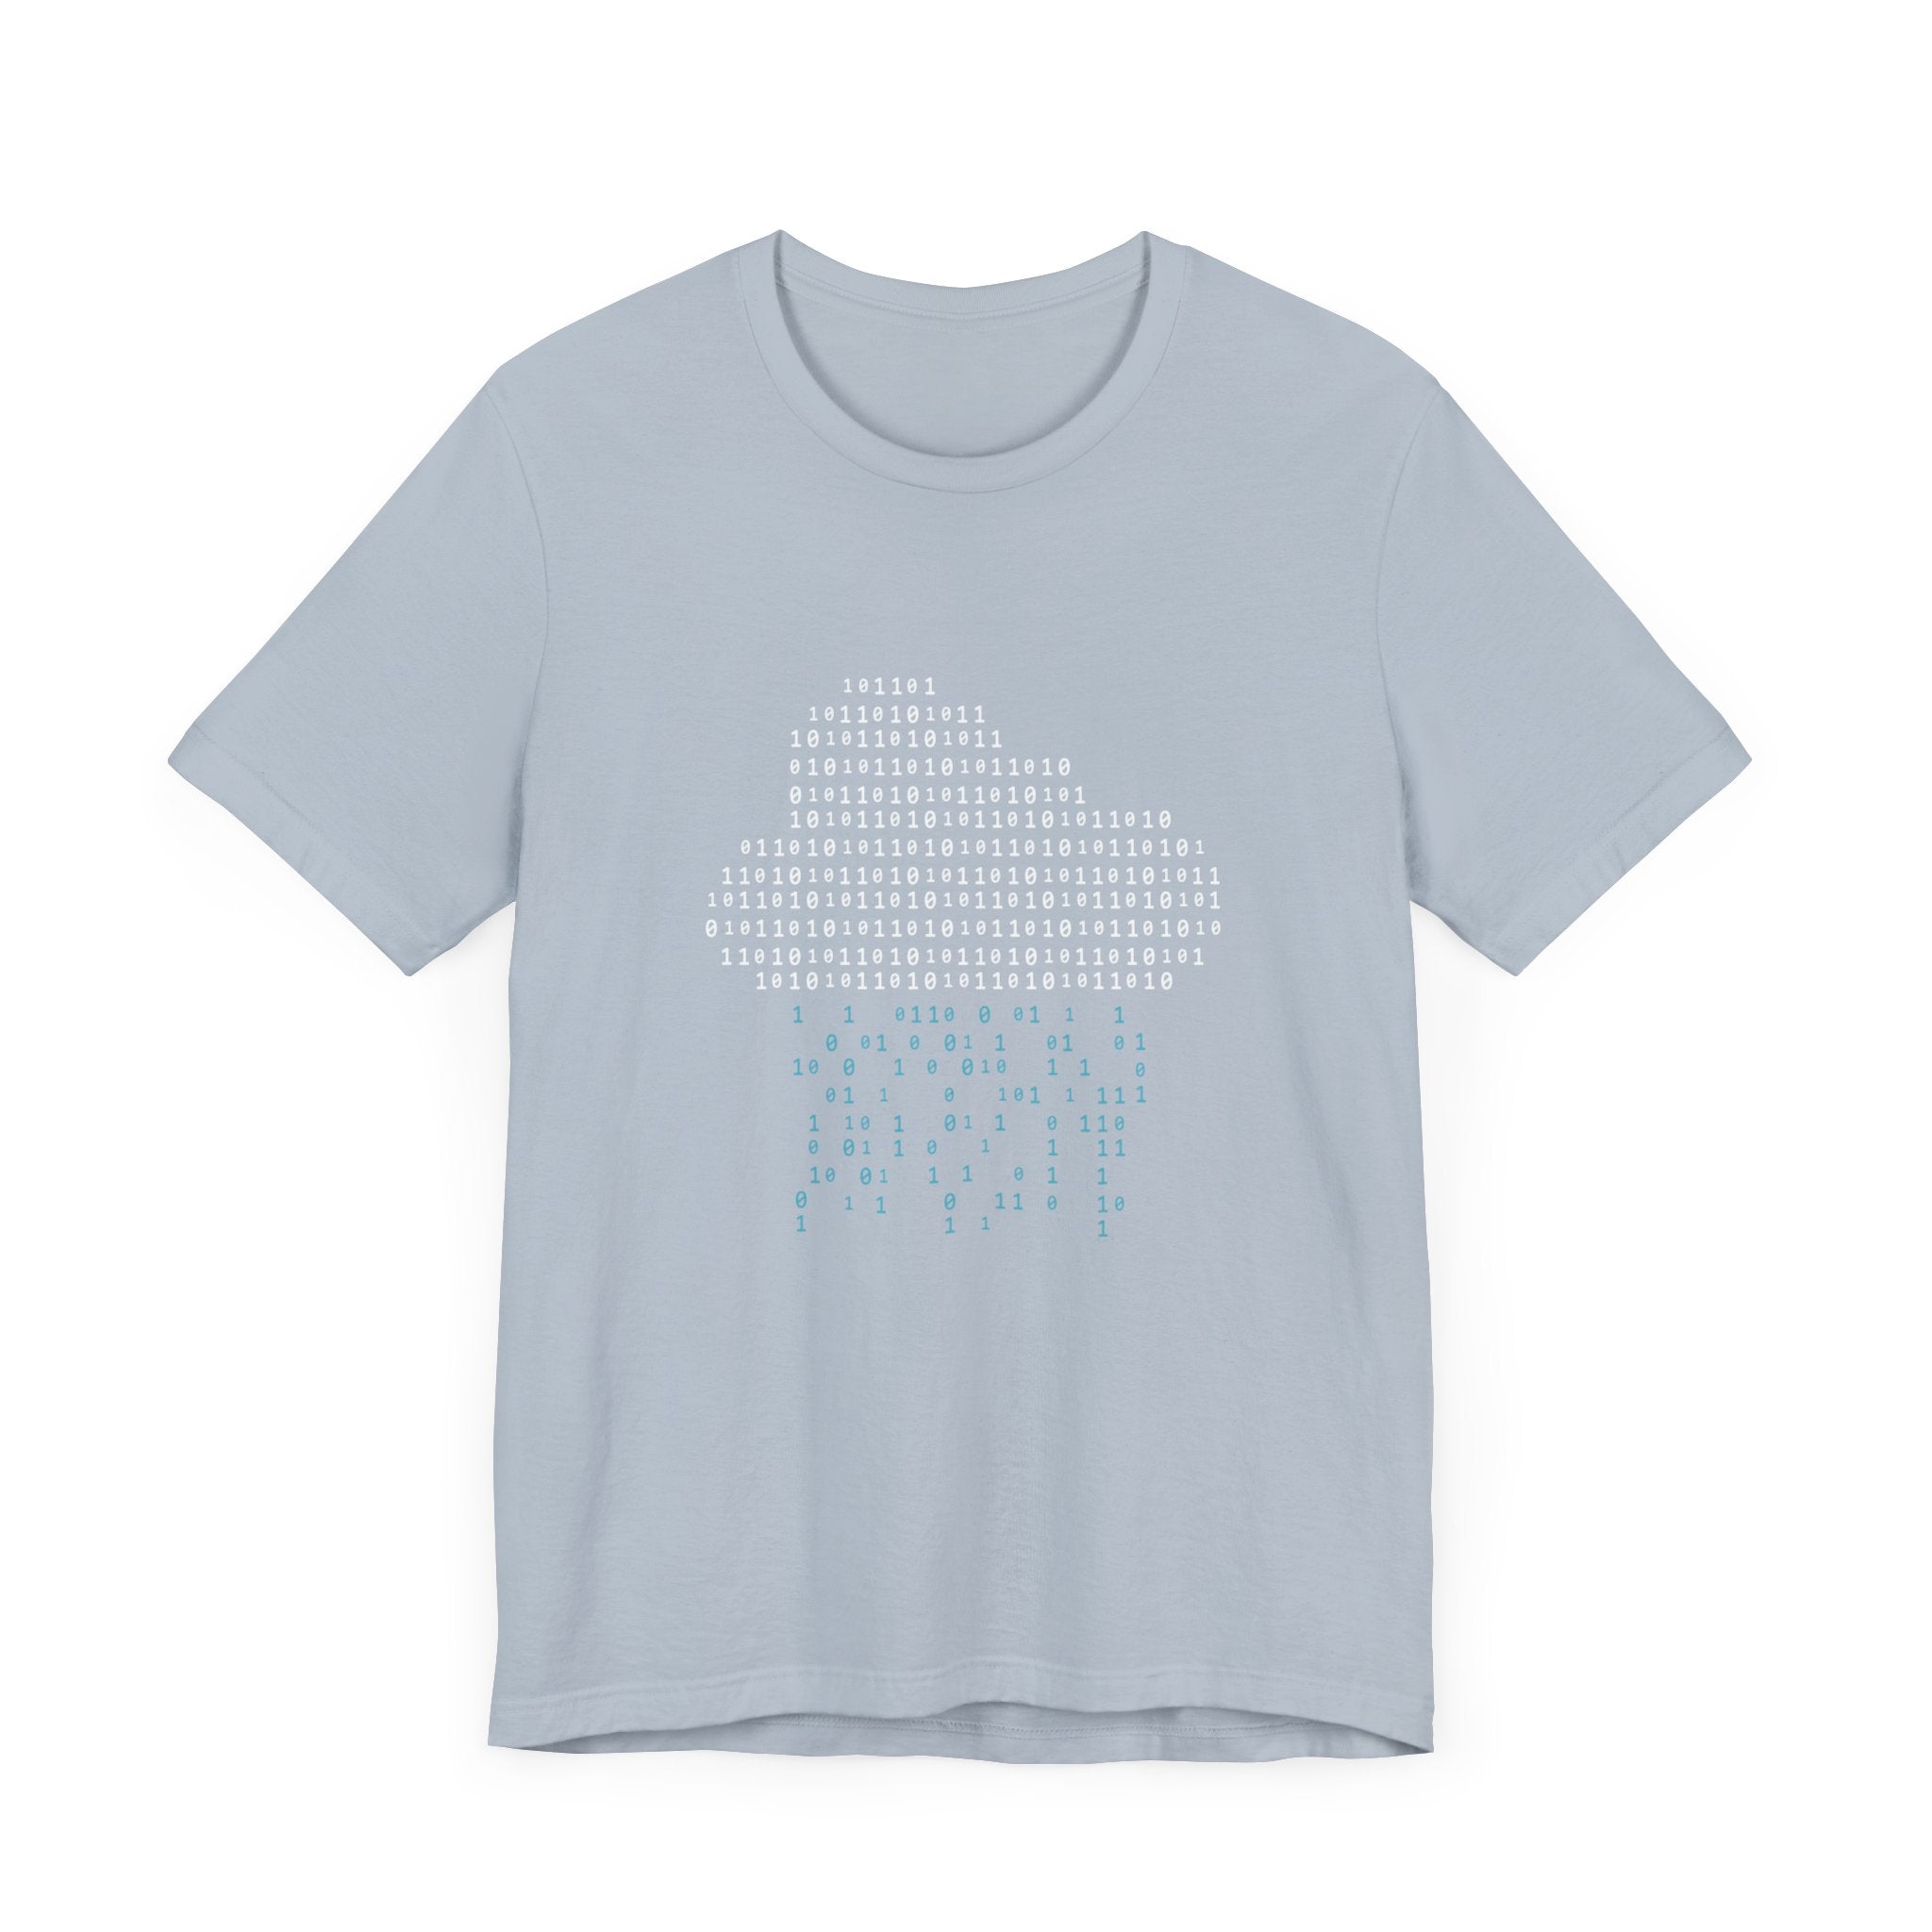 Light gray Binary Rain Cloud - T-Shirt crafted from Airlume combed, ring-spun cotton, featuring a binary code design forming the shape of a cloud with rain.